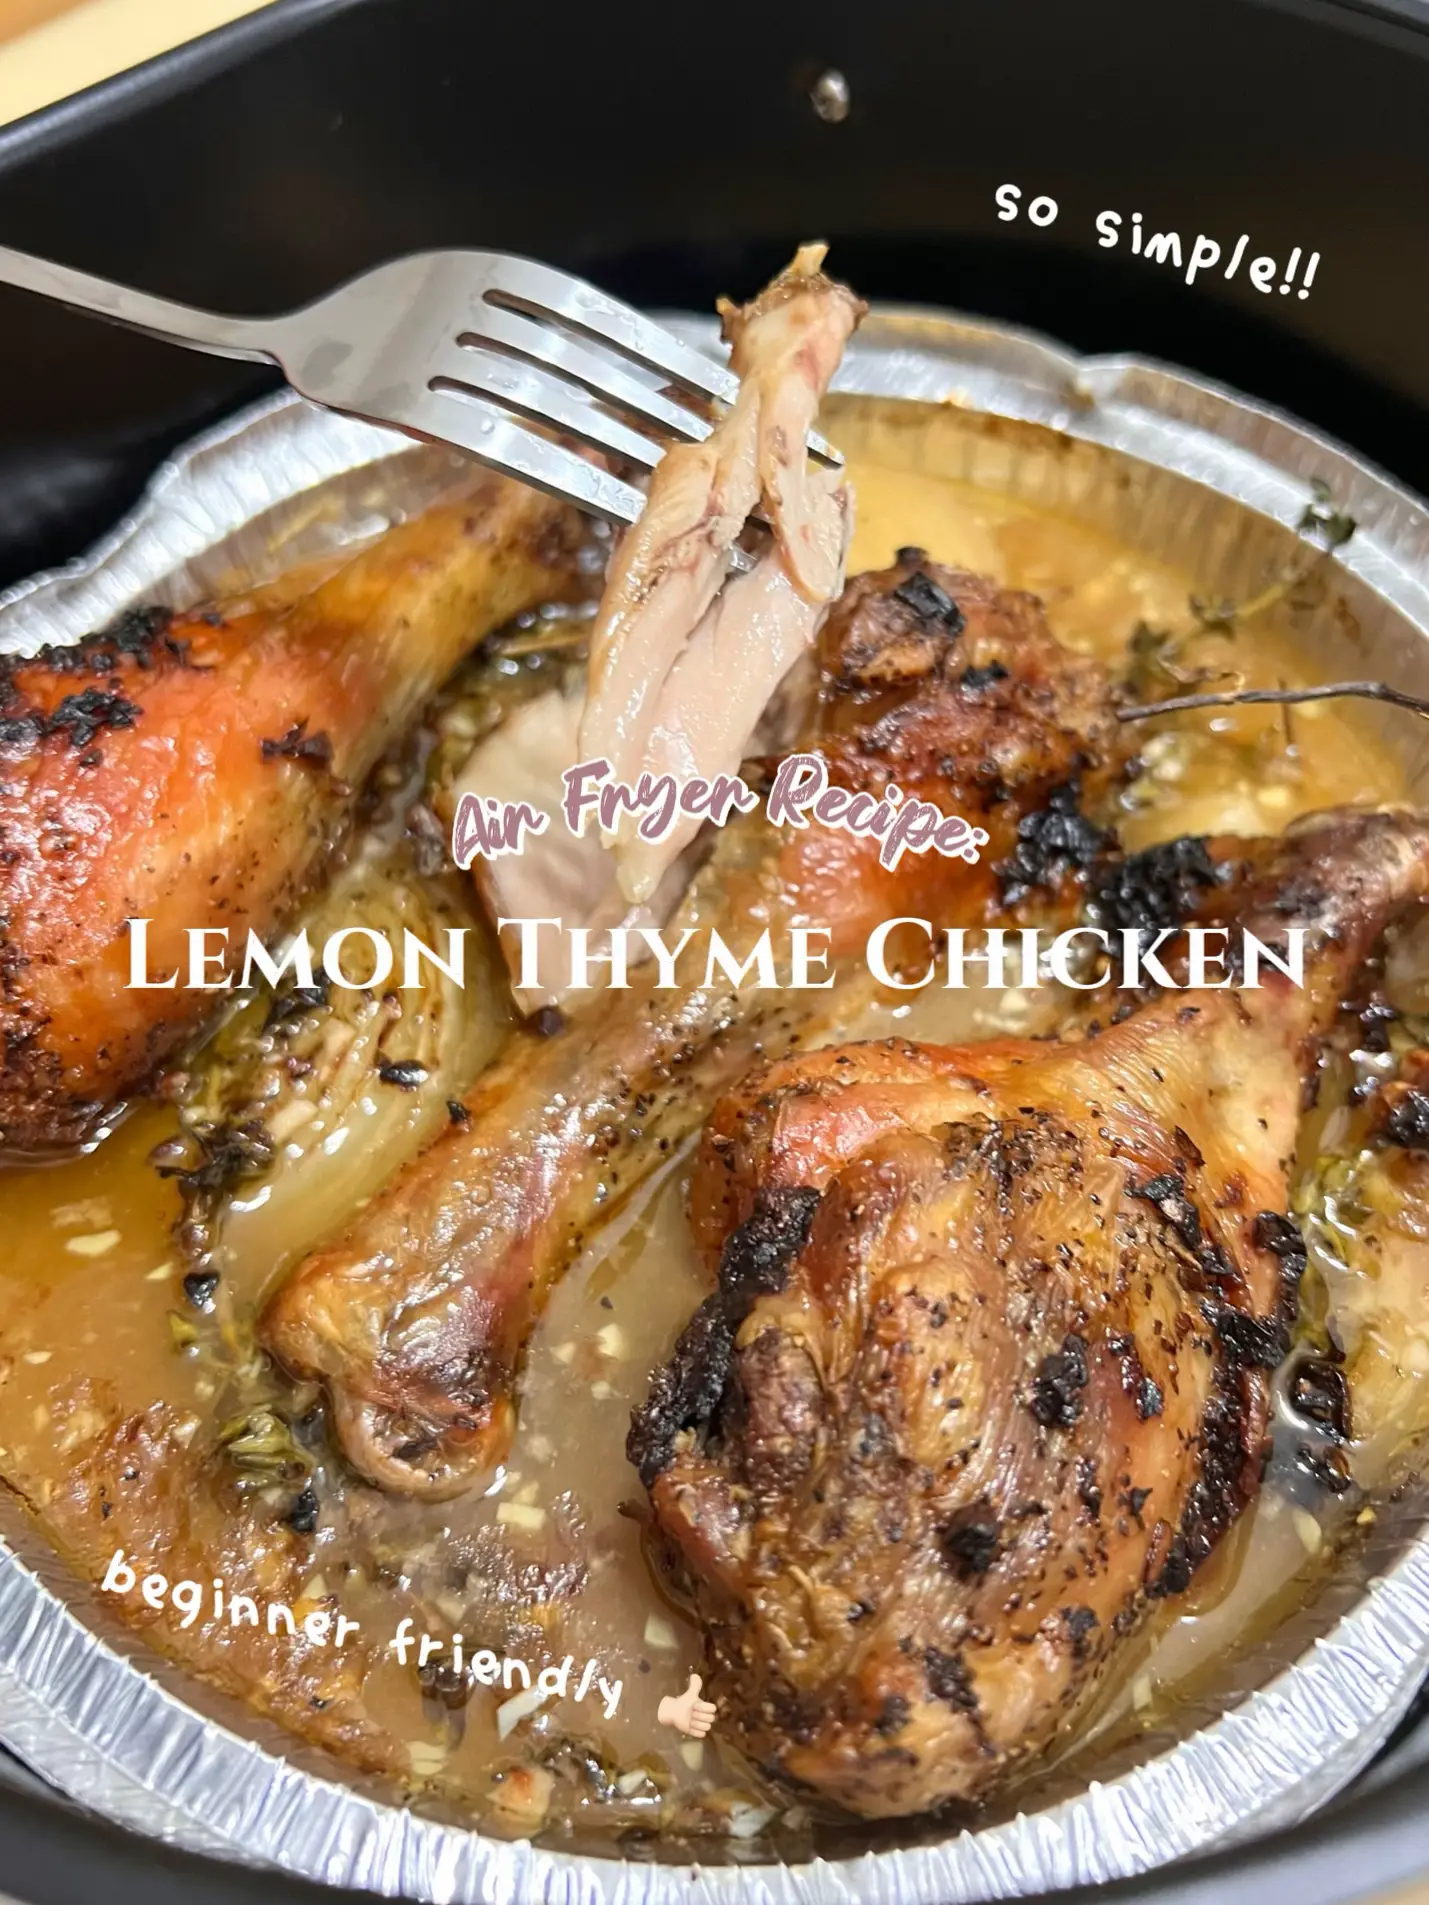 Lemon Thyme Chicken Recipe 😍 Super Simple and Easy's images(0)